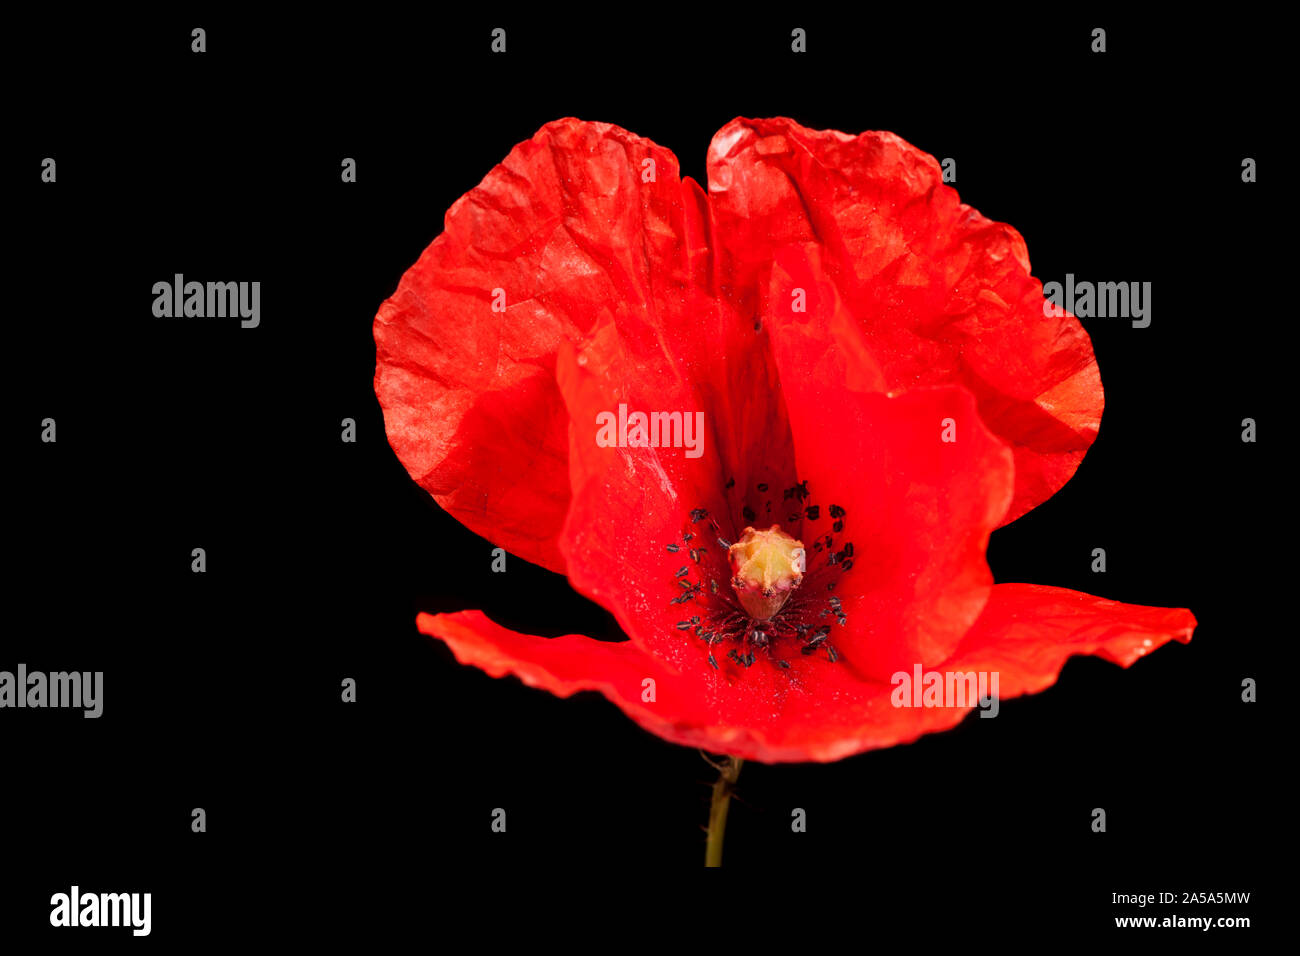 Side Studio Close-up of a single poppy (Papaver rhoeas) blossom with stems in front of black background. Stock Photo